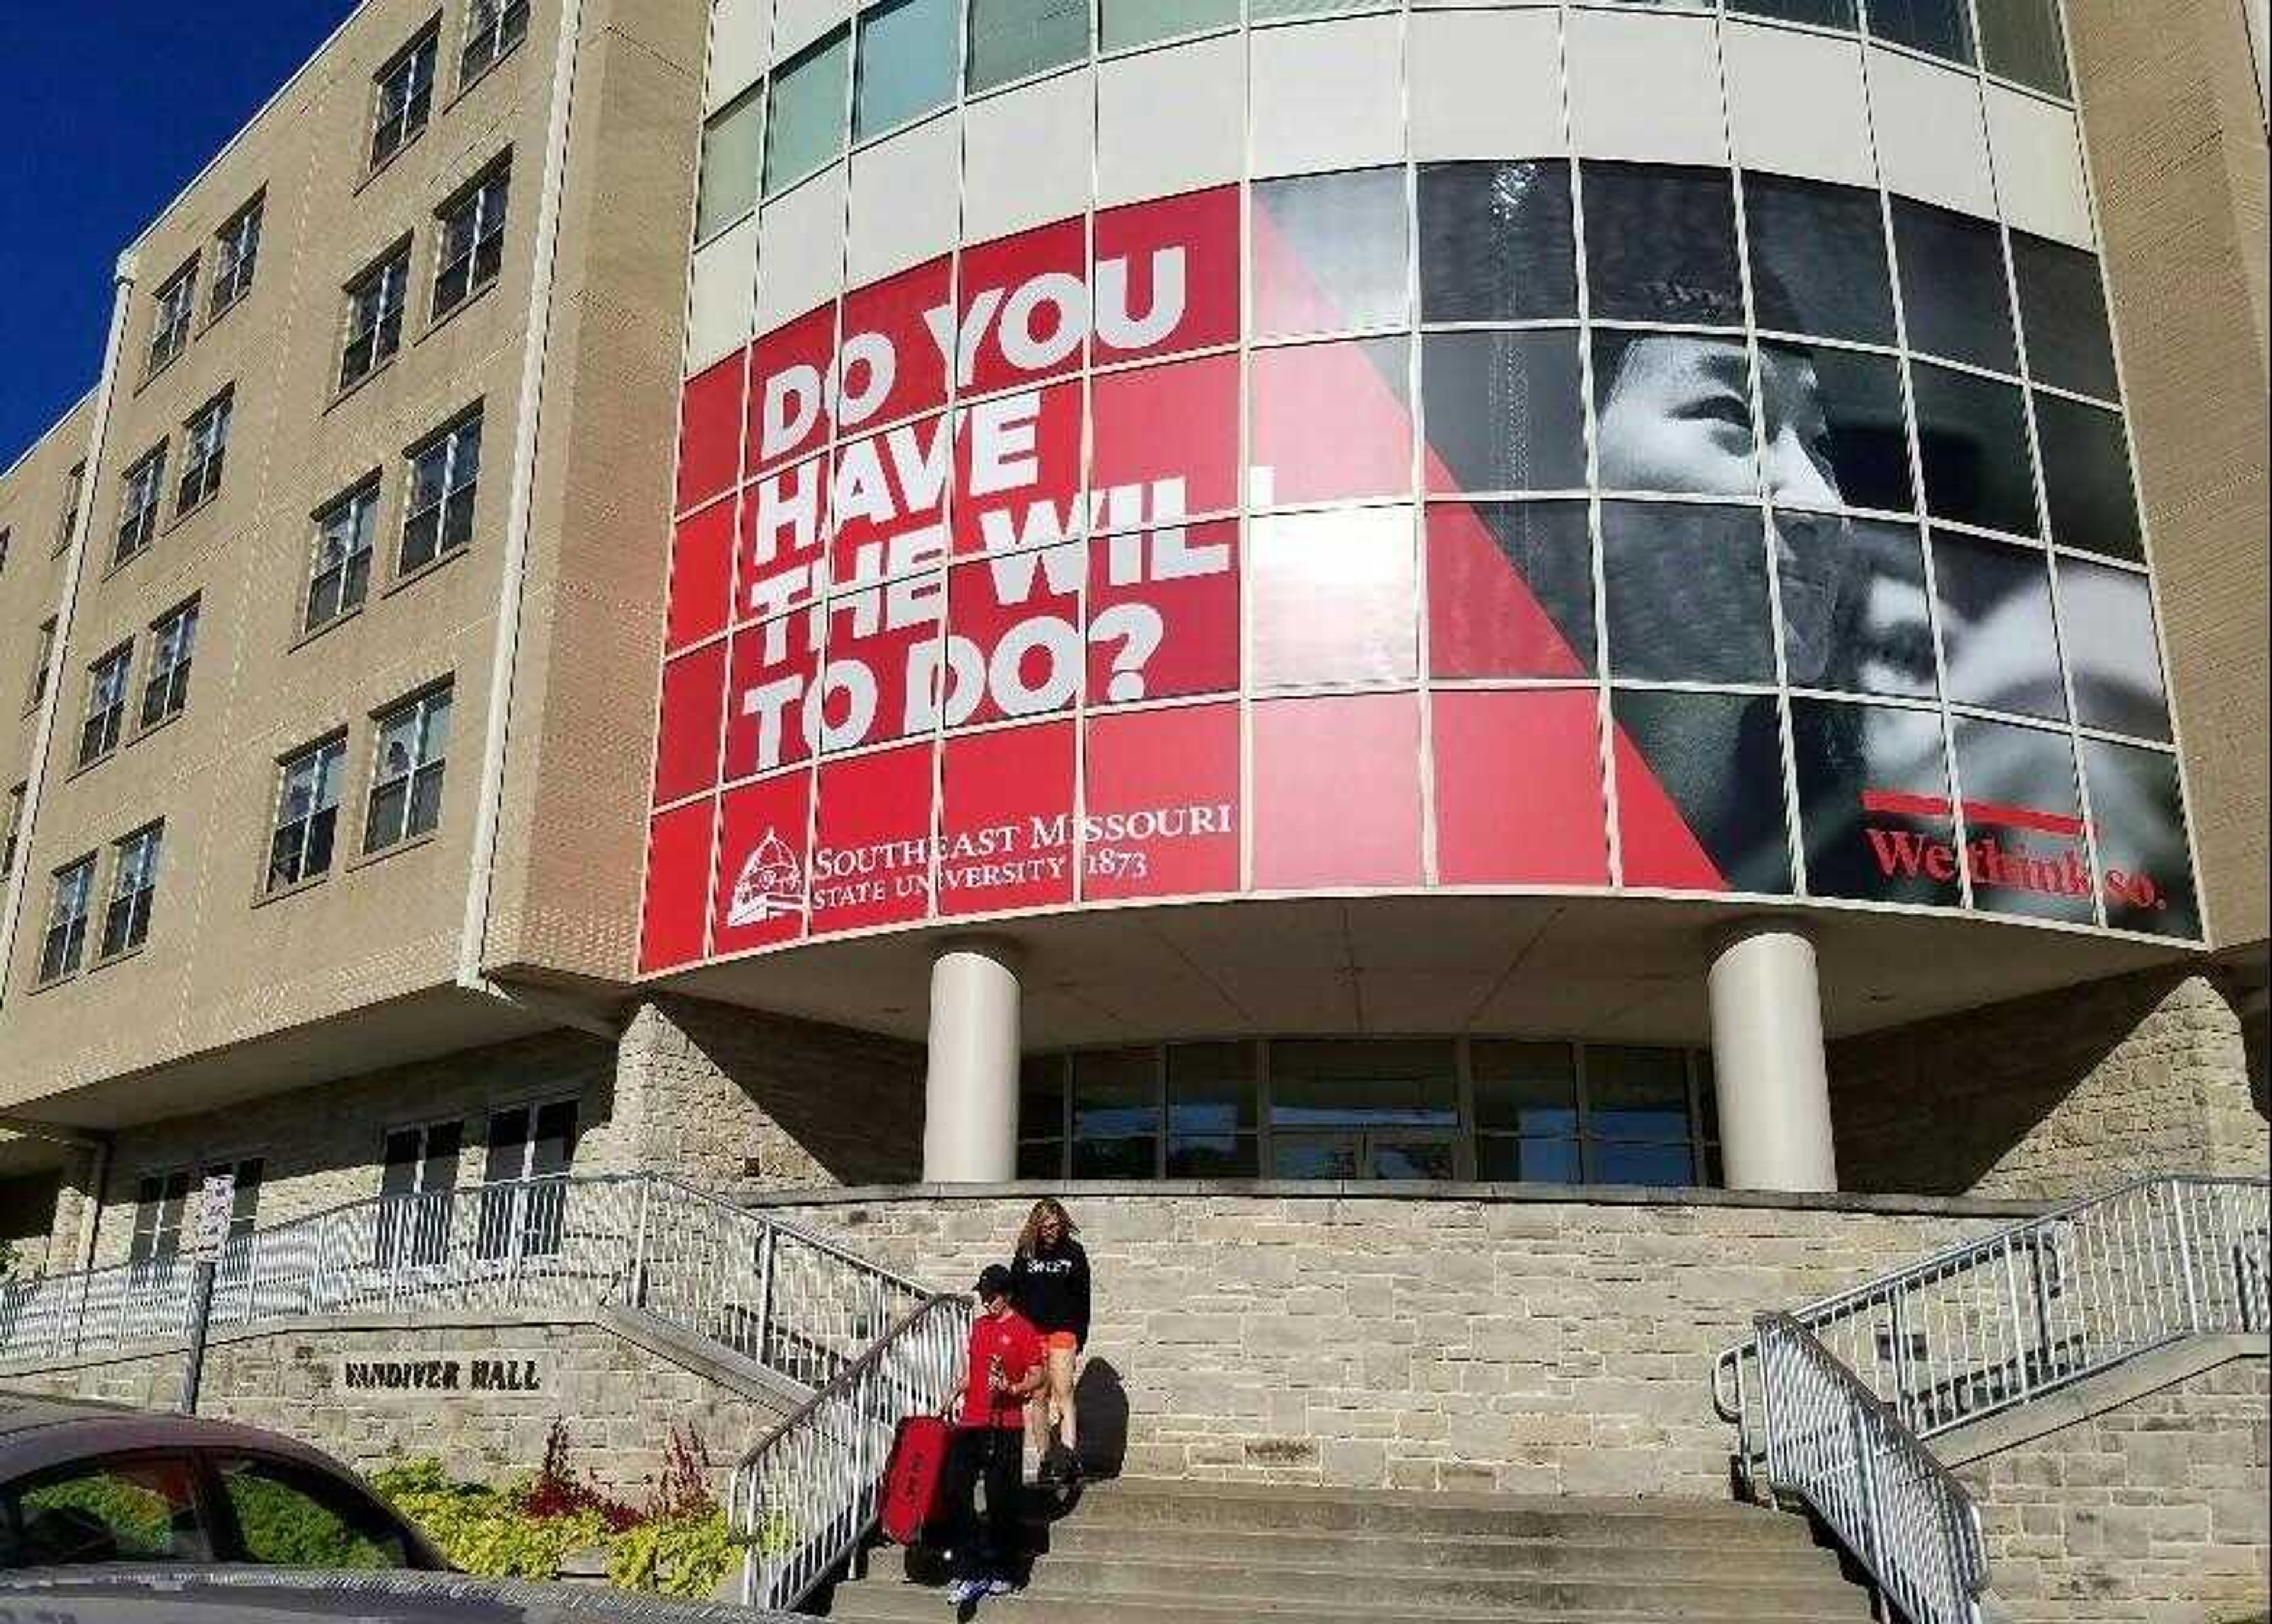 Southeast's "Will to Do" marketing campaign can be seen in many places around campus, like Merrick Hall.